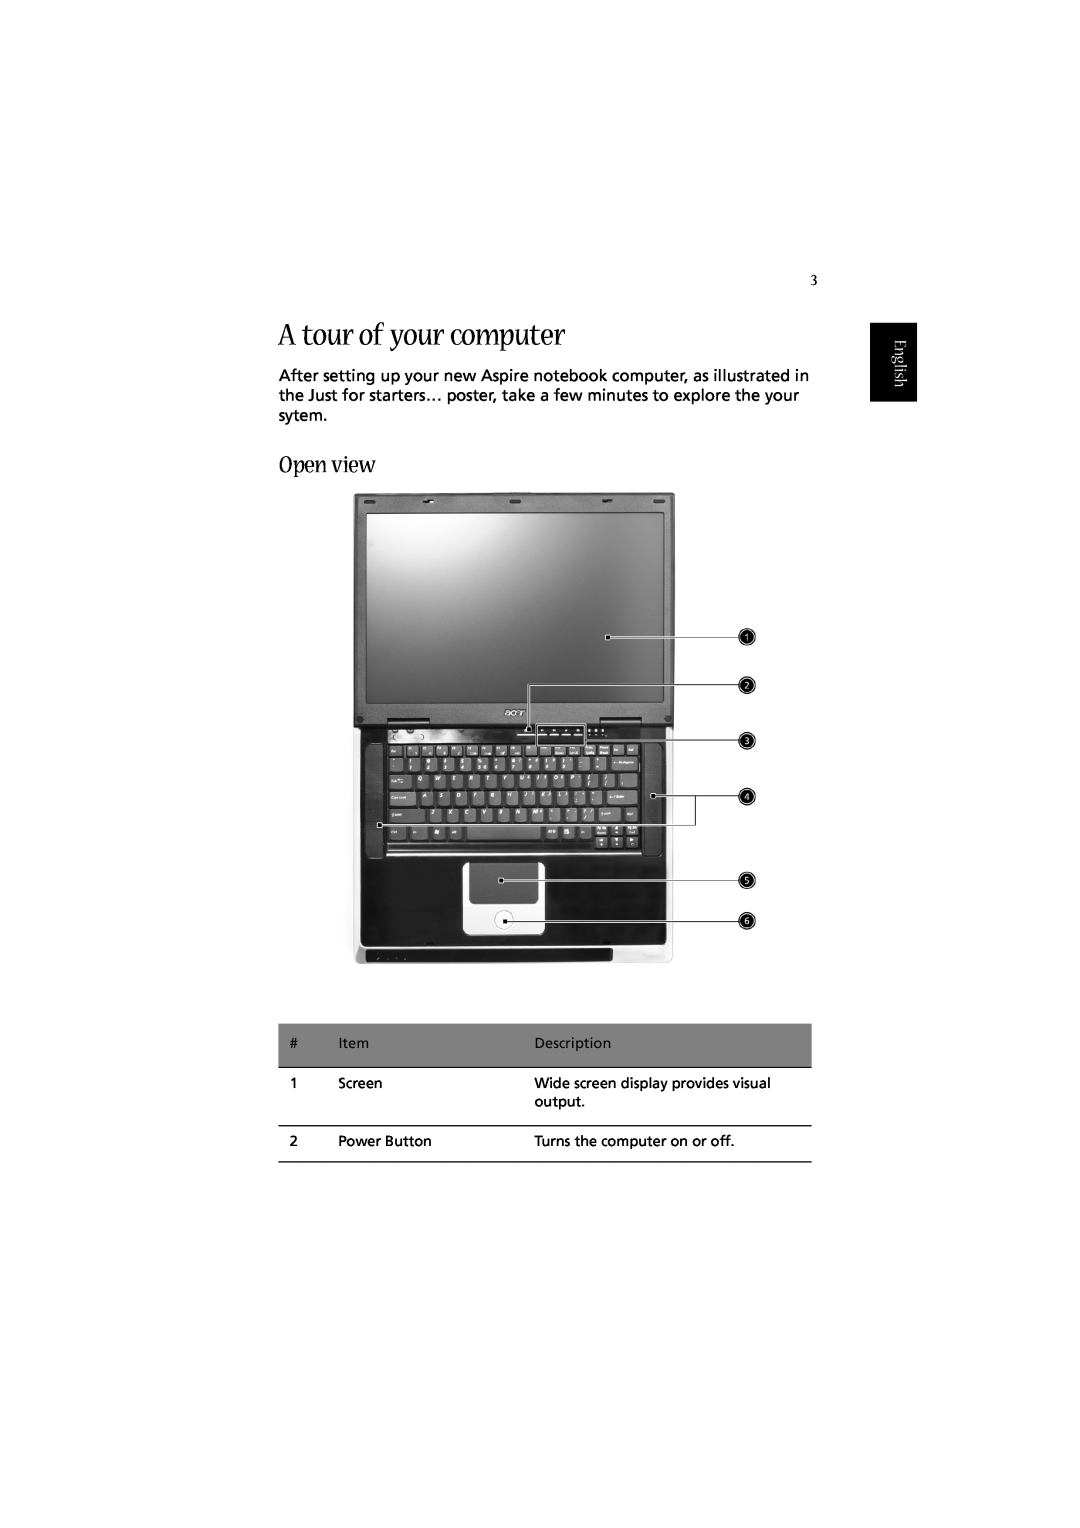 Acer 2010 manual A tour of your computer, Open view, English 